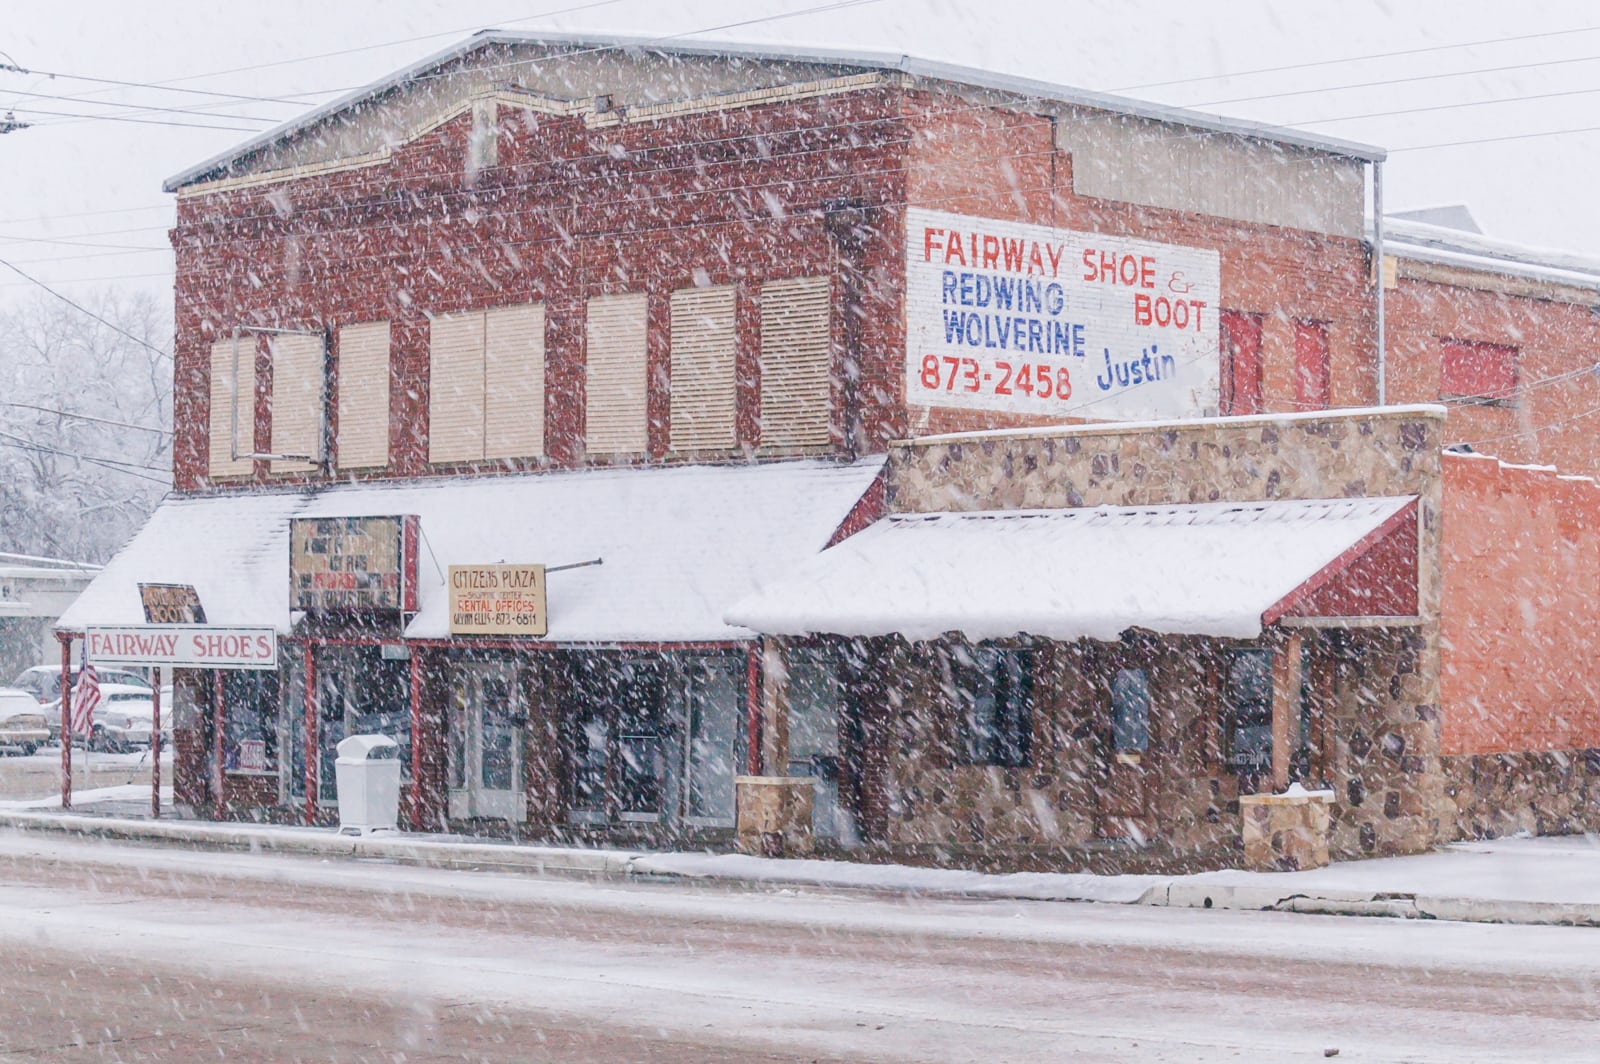 Fairway Shoe store in the Wills Point snow storm 